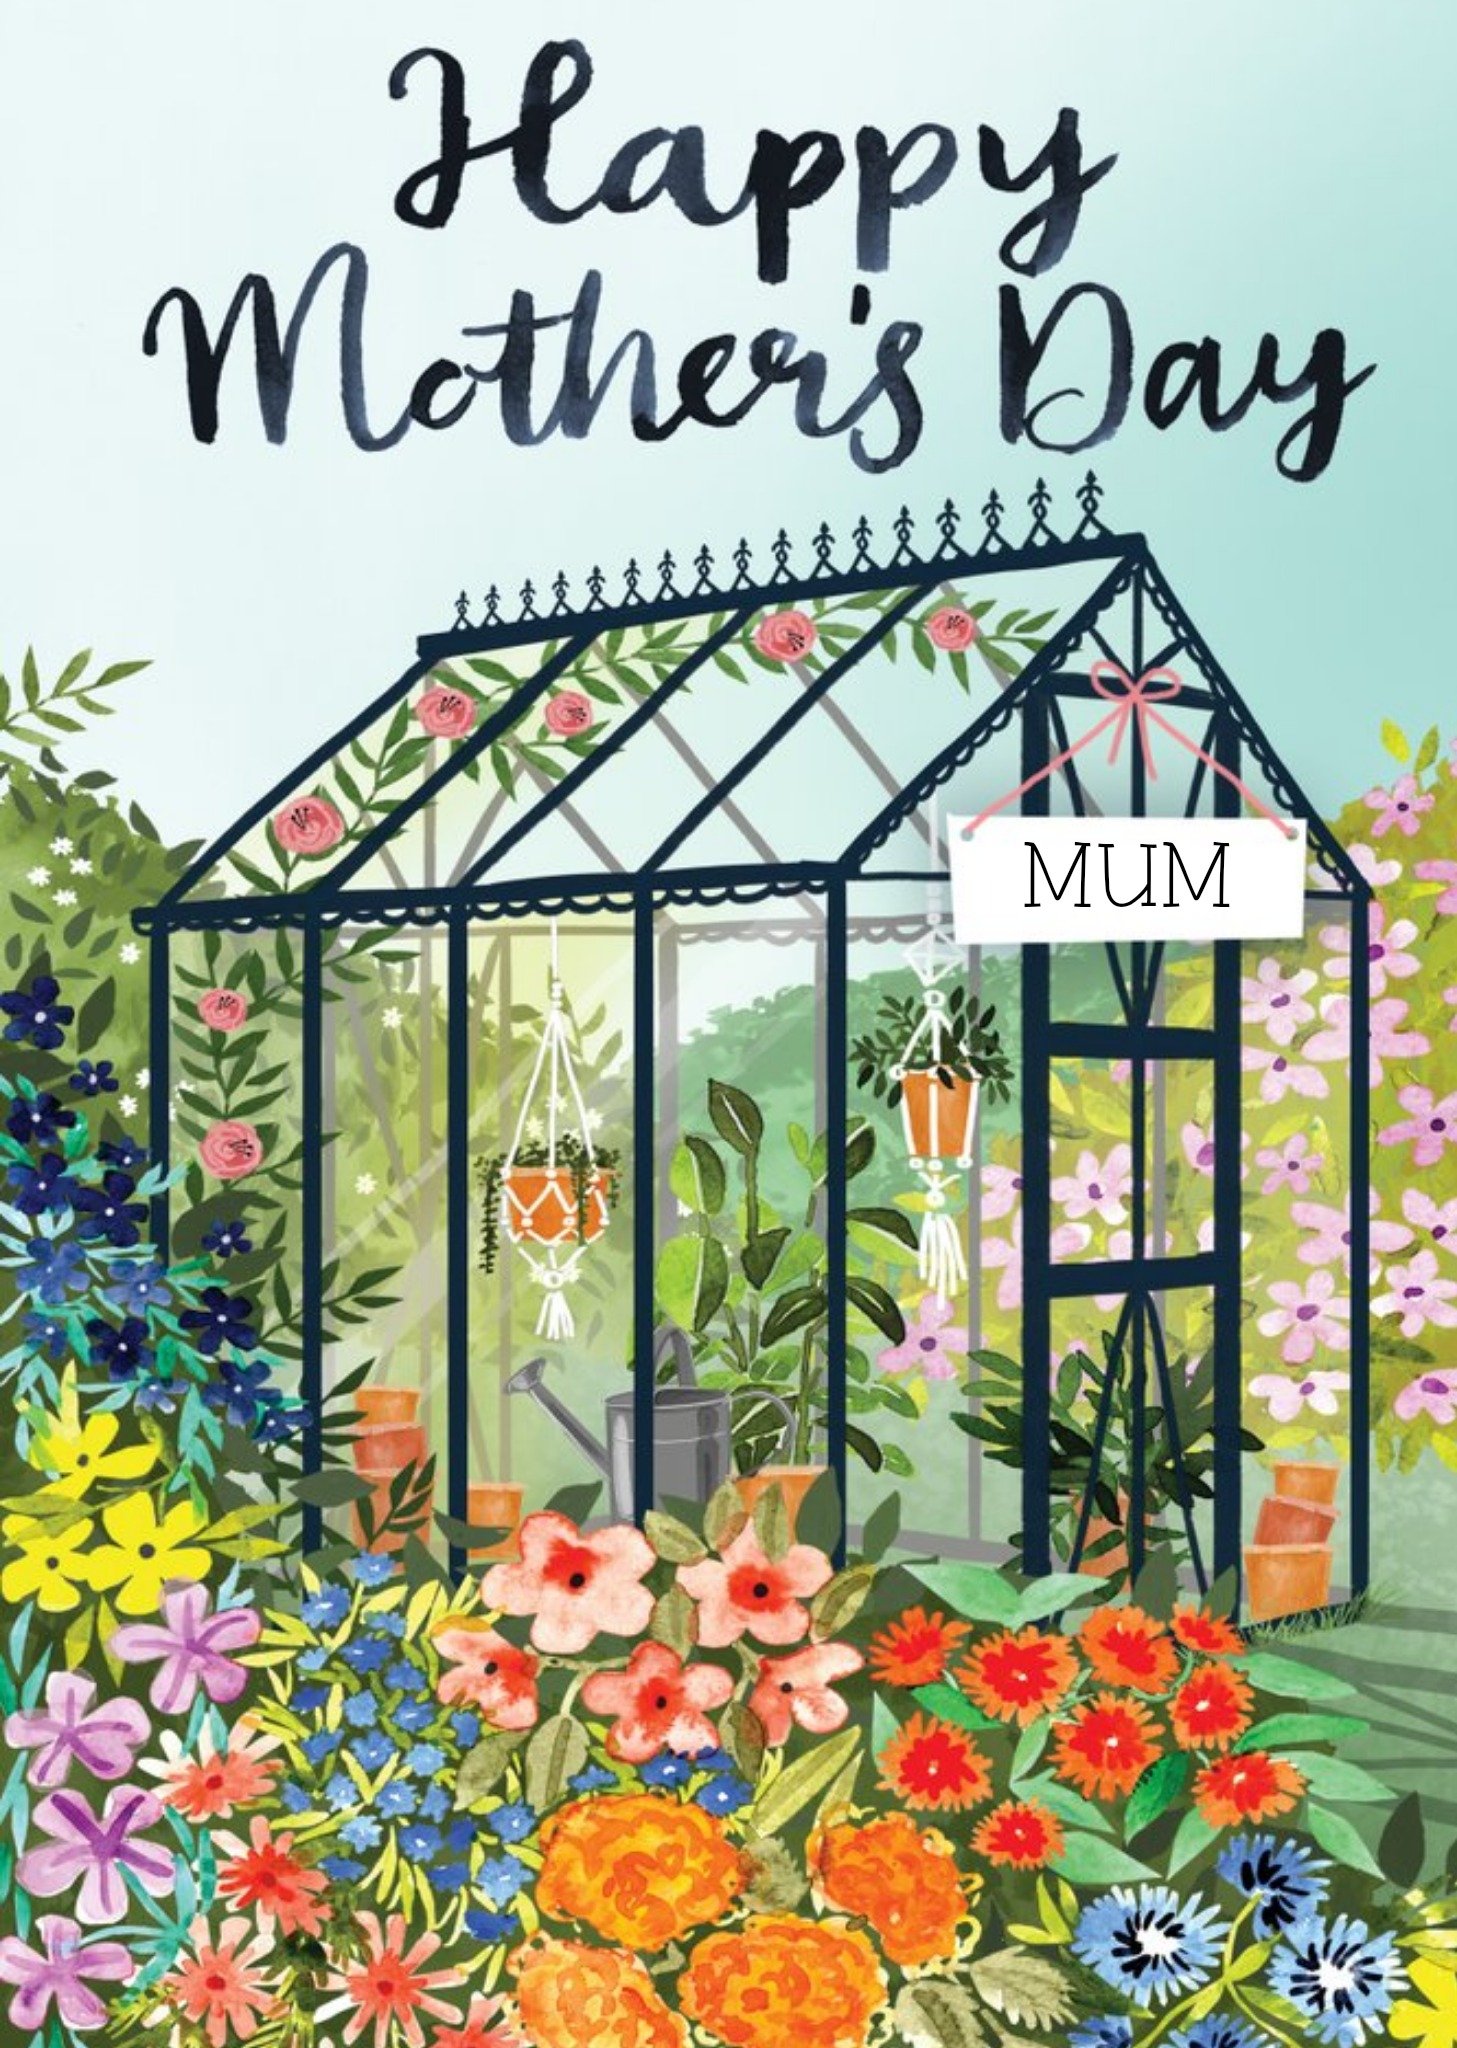 Moonpig Mum's Greenhouse Beautiful Painted Garden Mother's Day Card, Large